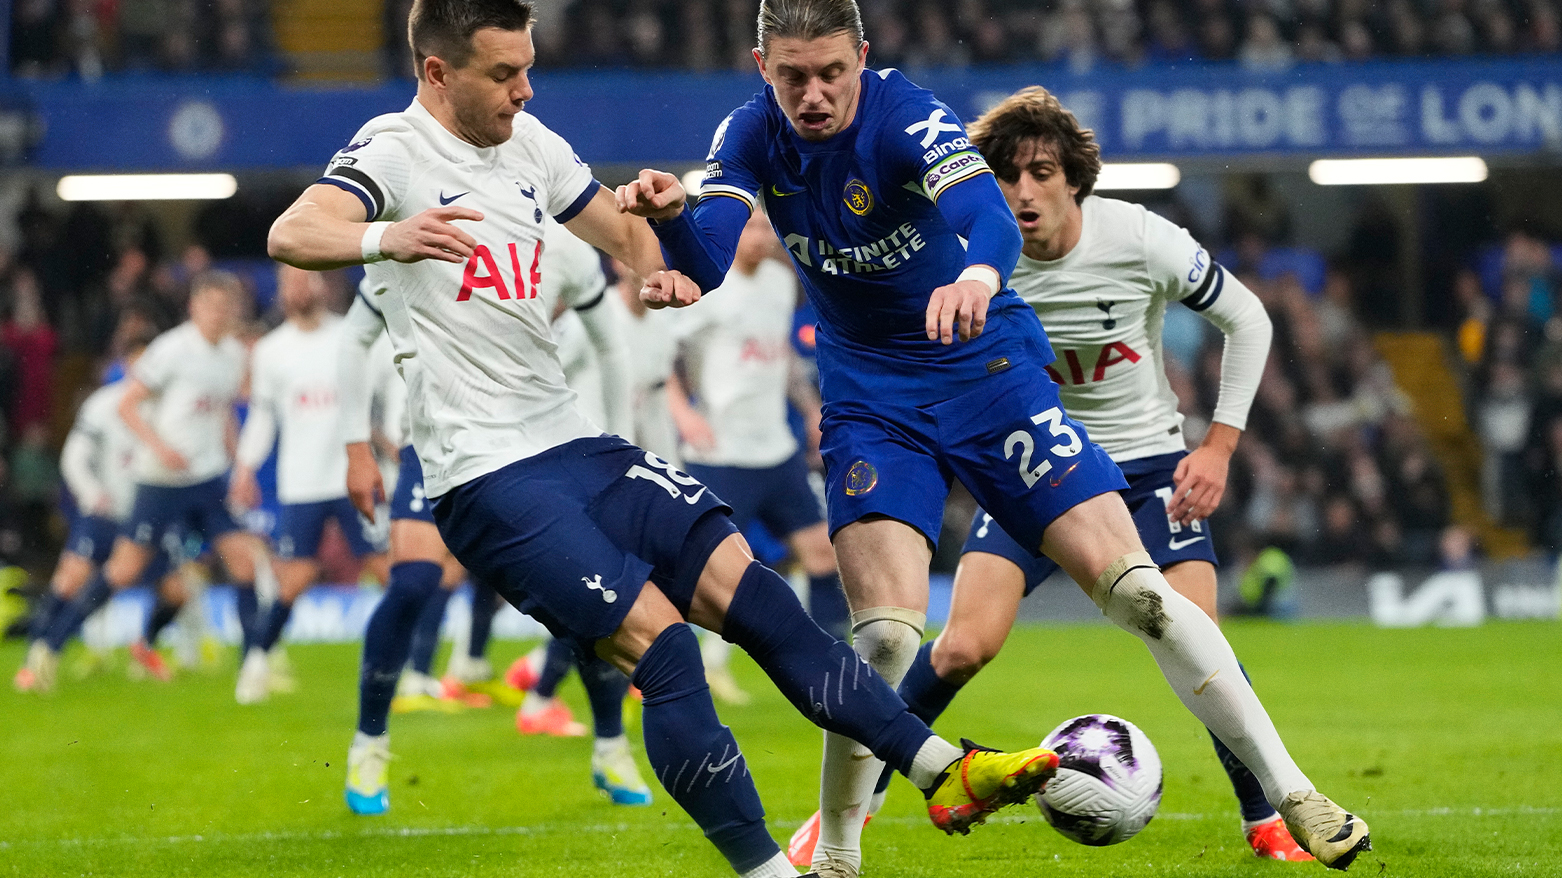 Chelsea's Conor Gallagher, right, is challenged by Tottenham's Giovani Lo Celso, left, during the English Premier League. (Photo: AP)